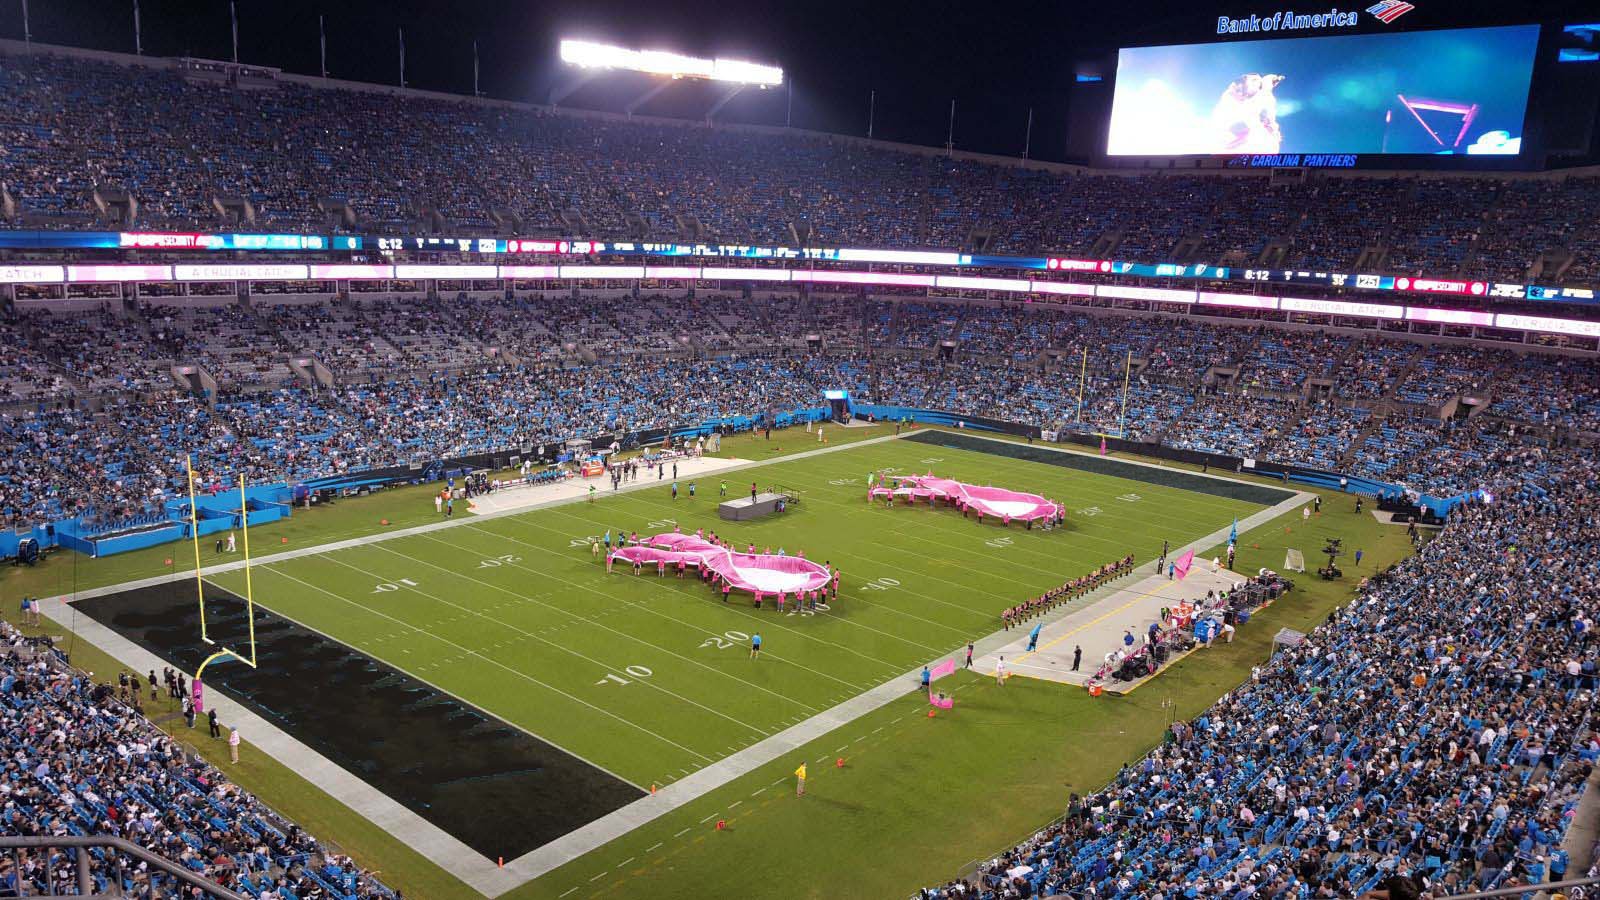 section 522, row 5 seat view  for football - bank of america stadium